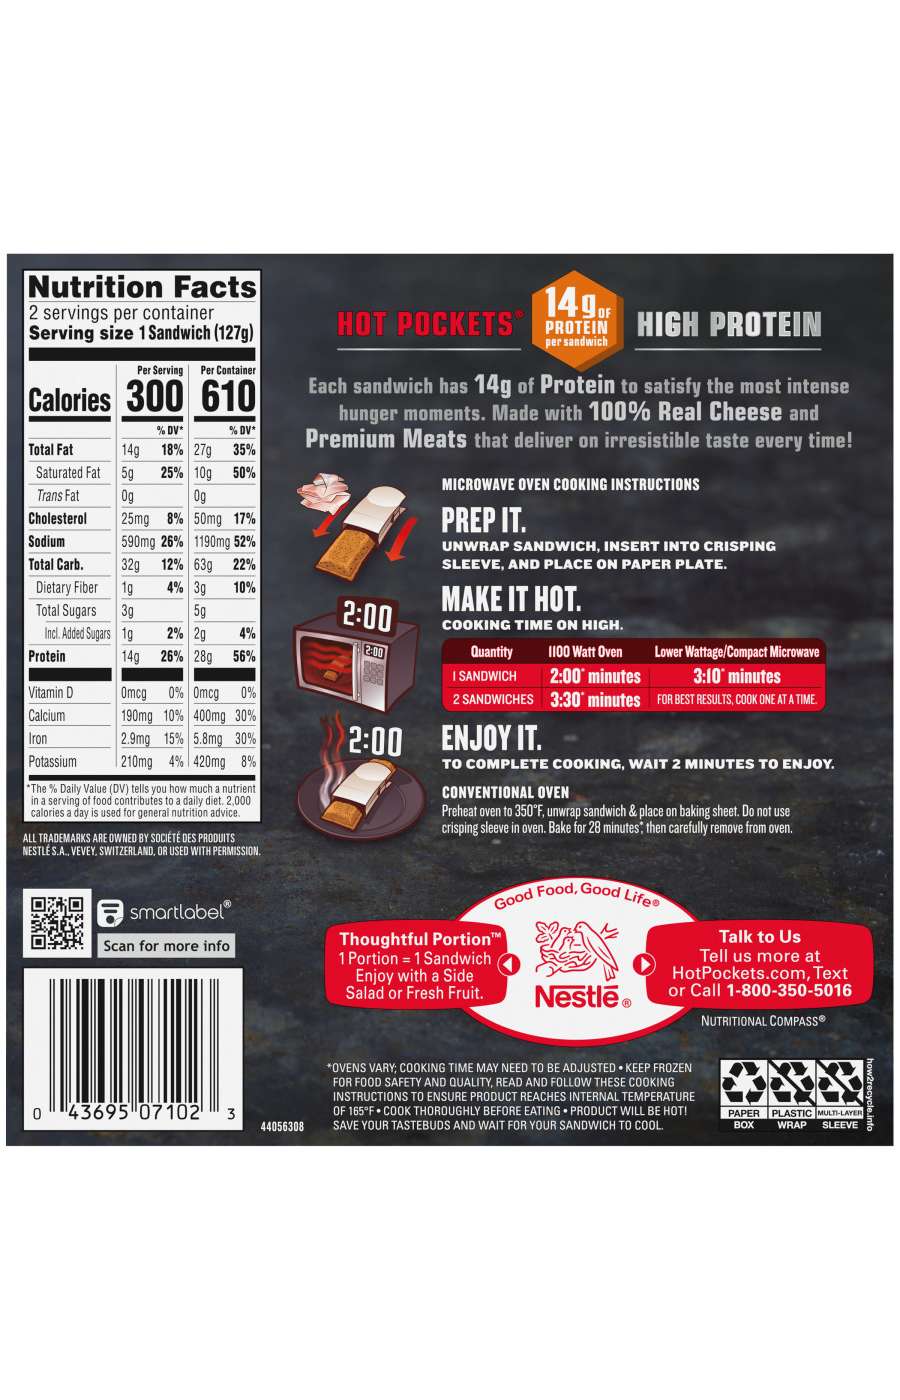 Hot Pockets High Protein Four Meat & Four Cheese Pizza Frozen Sandwiches; image 4 of 4